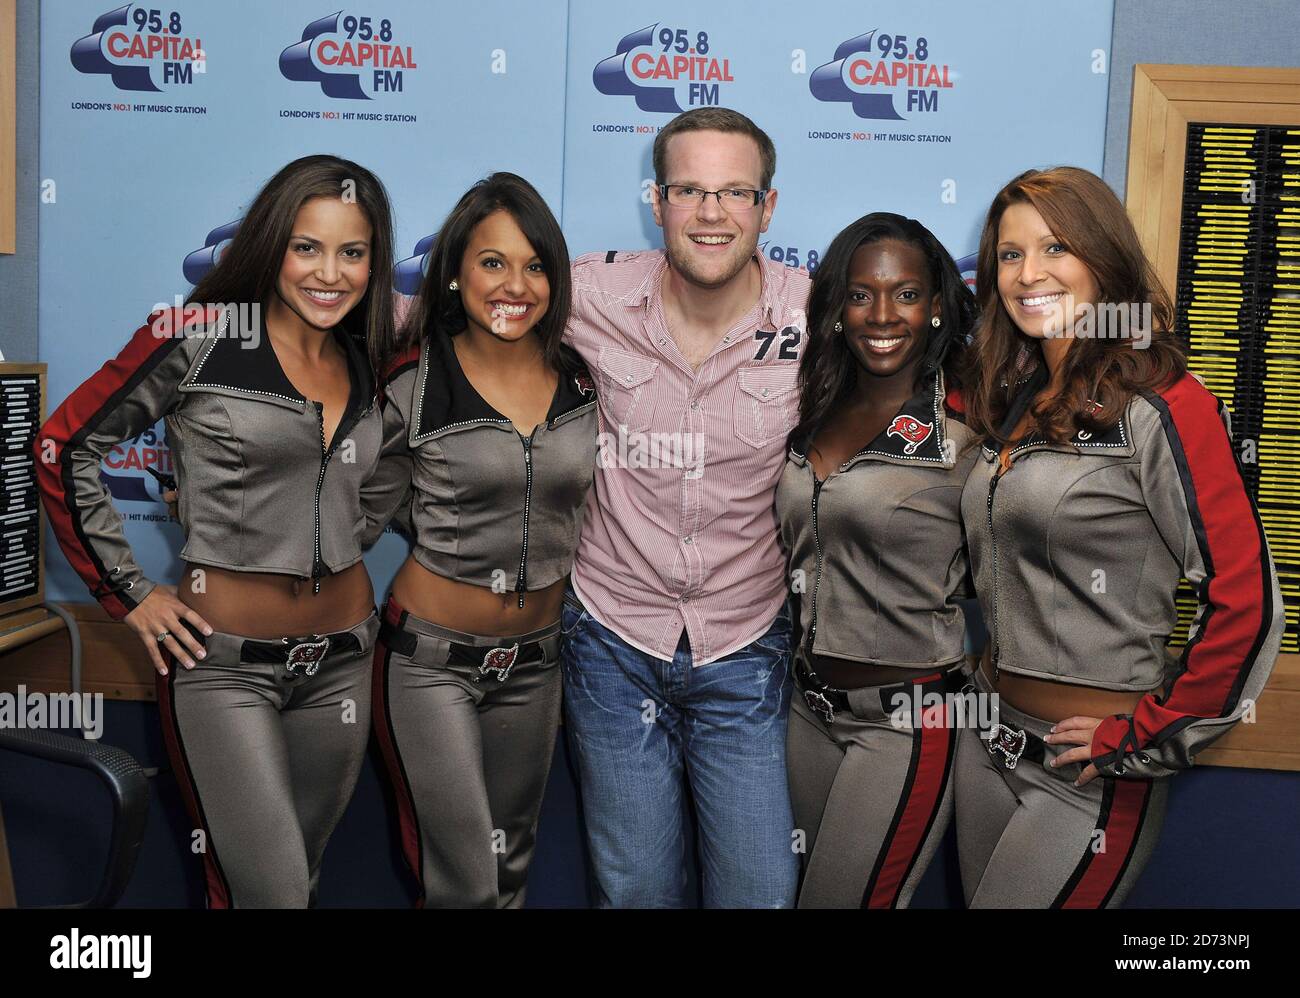 (l-r) Corinne Colon, Tiffany Jimenez, DJ Roberto, Kelli Jones and Jaime Hanna of the Tampa Bay Cheerleaders pose for photographs at the Global Radio studios in central London, after appearing on the Roberto radio show on 95.8 Capital FM.  Stock Photo